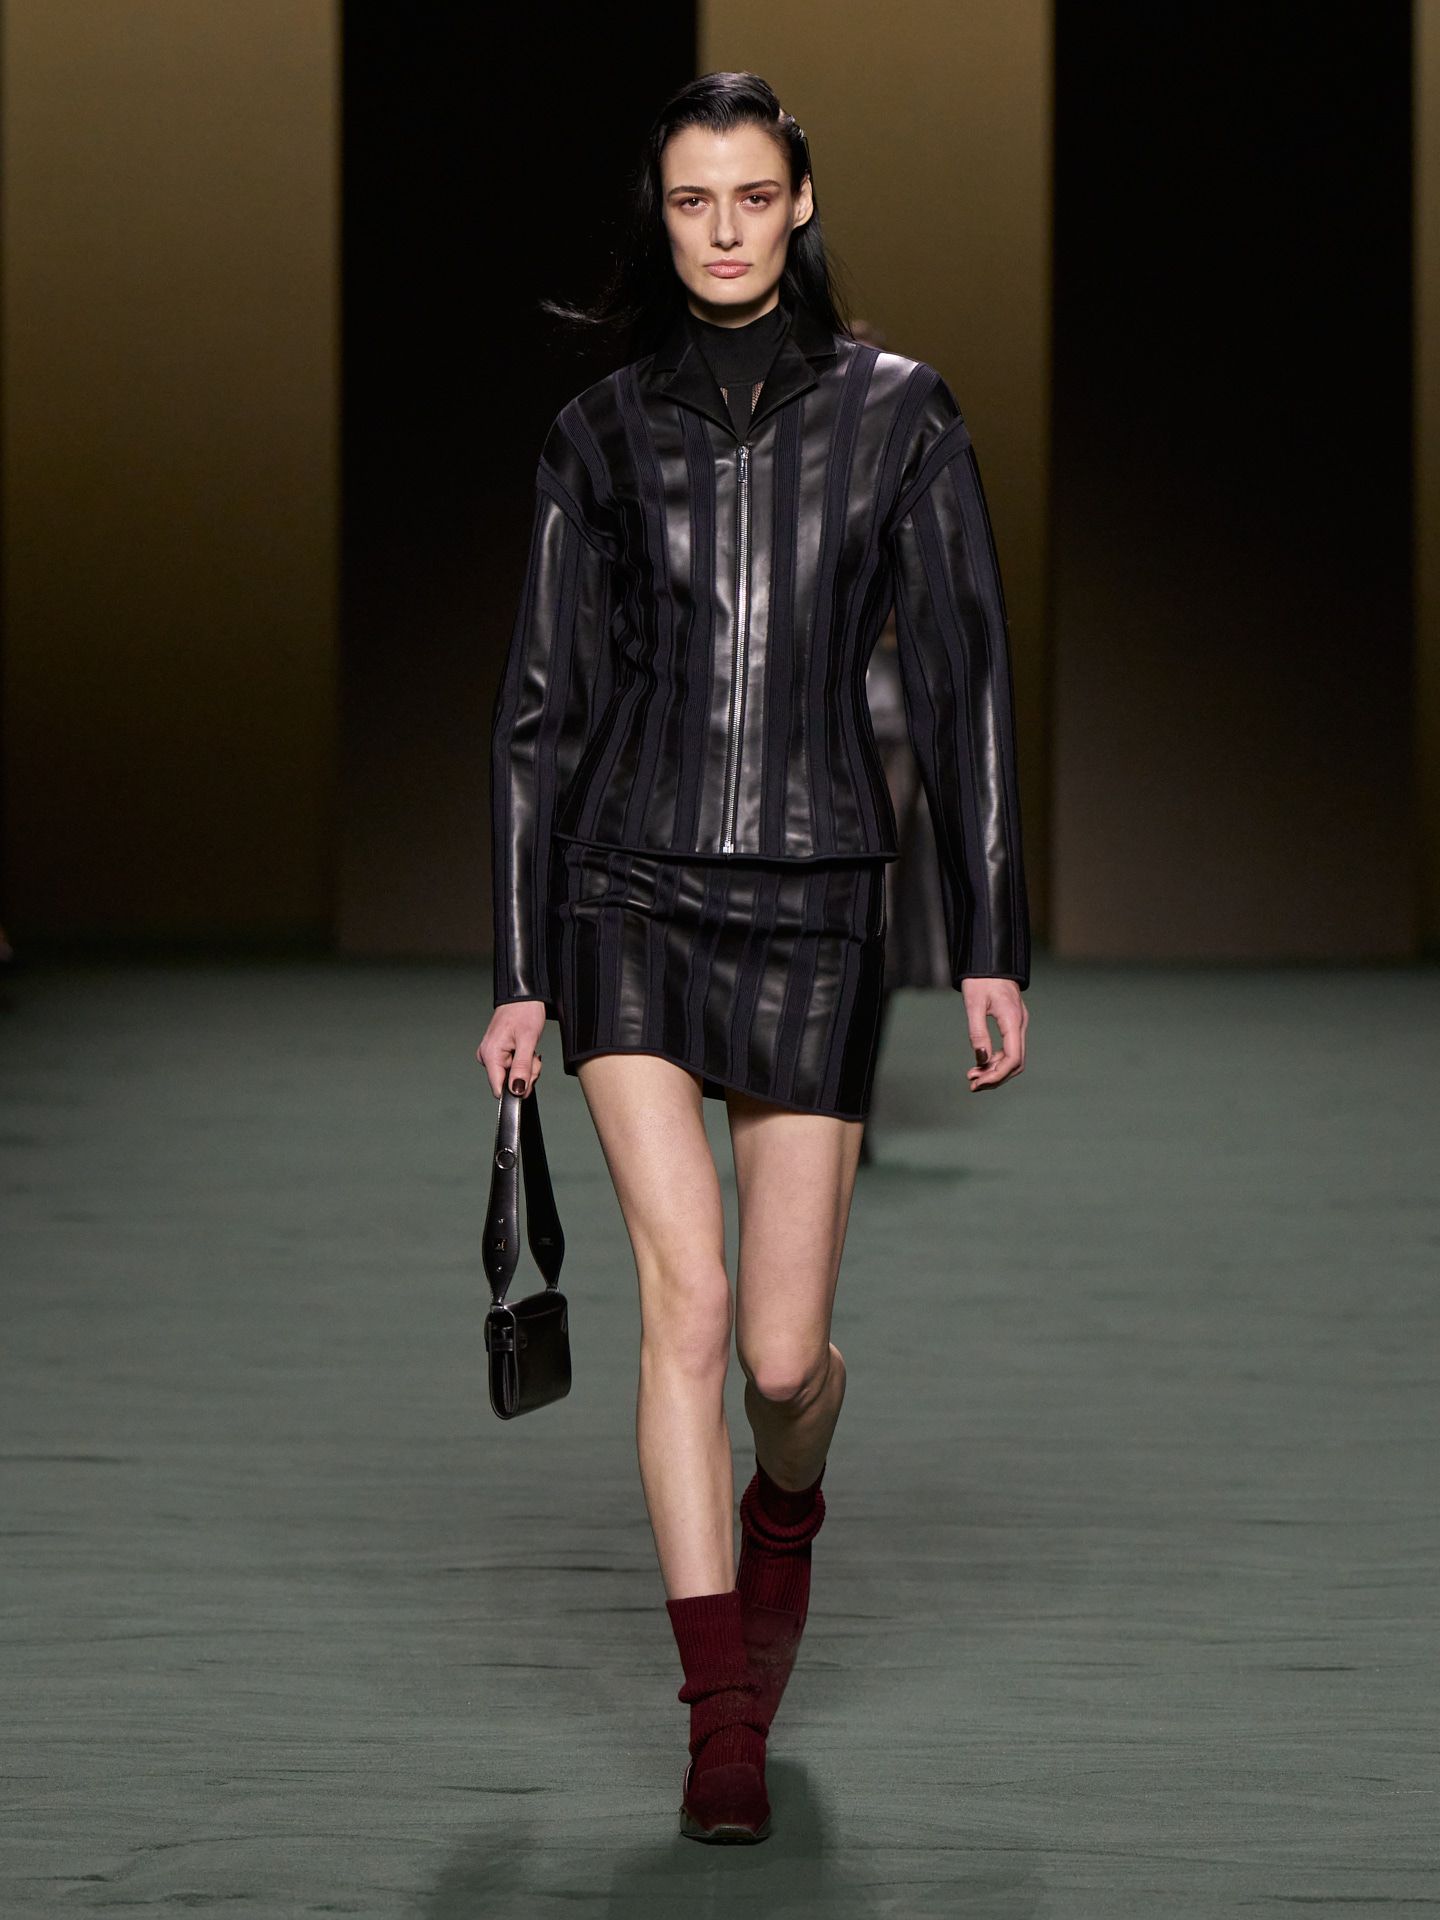 5 Interesting Things from Hermès Autumn Winter 2022 Women's Collection